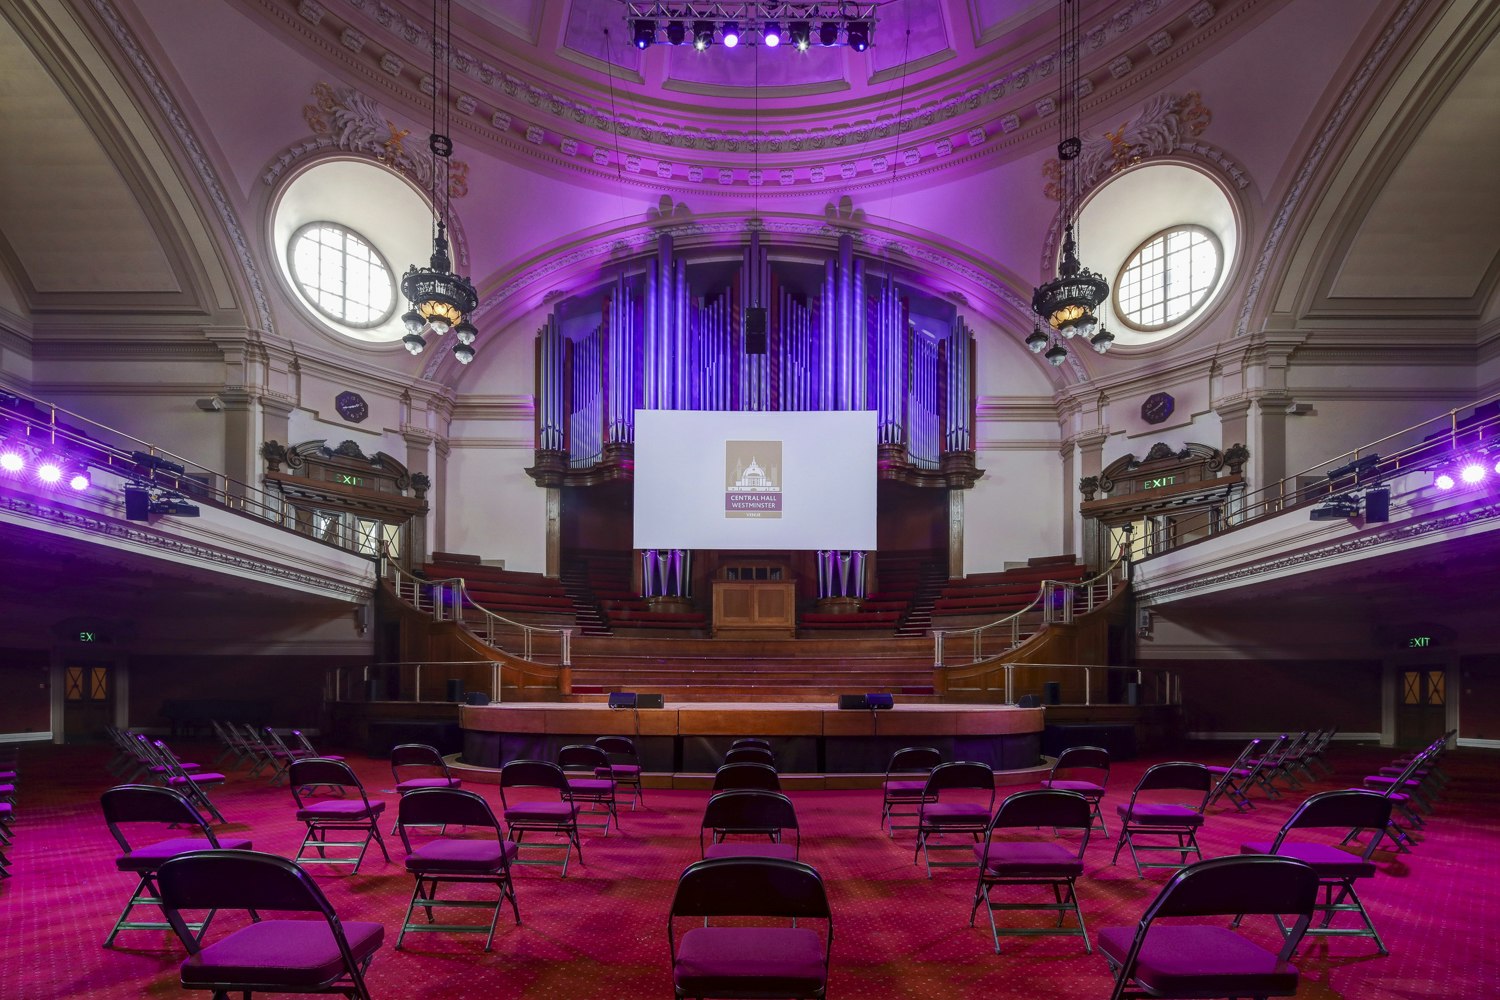 Large Conference Venues in London - Central Hall Westminster